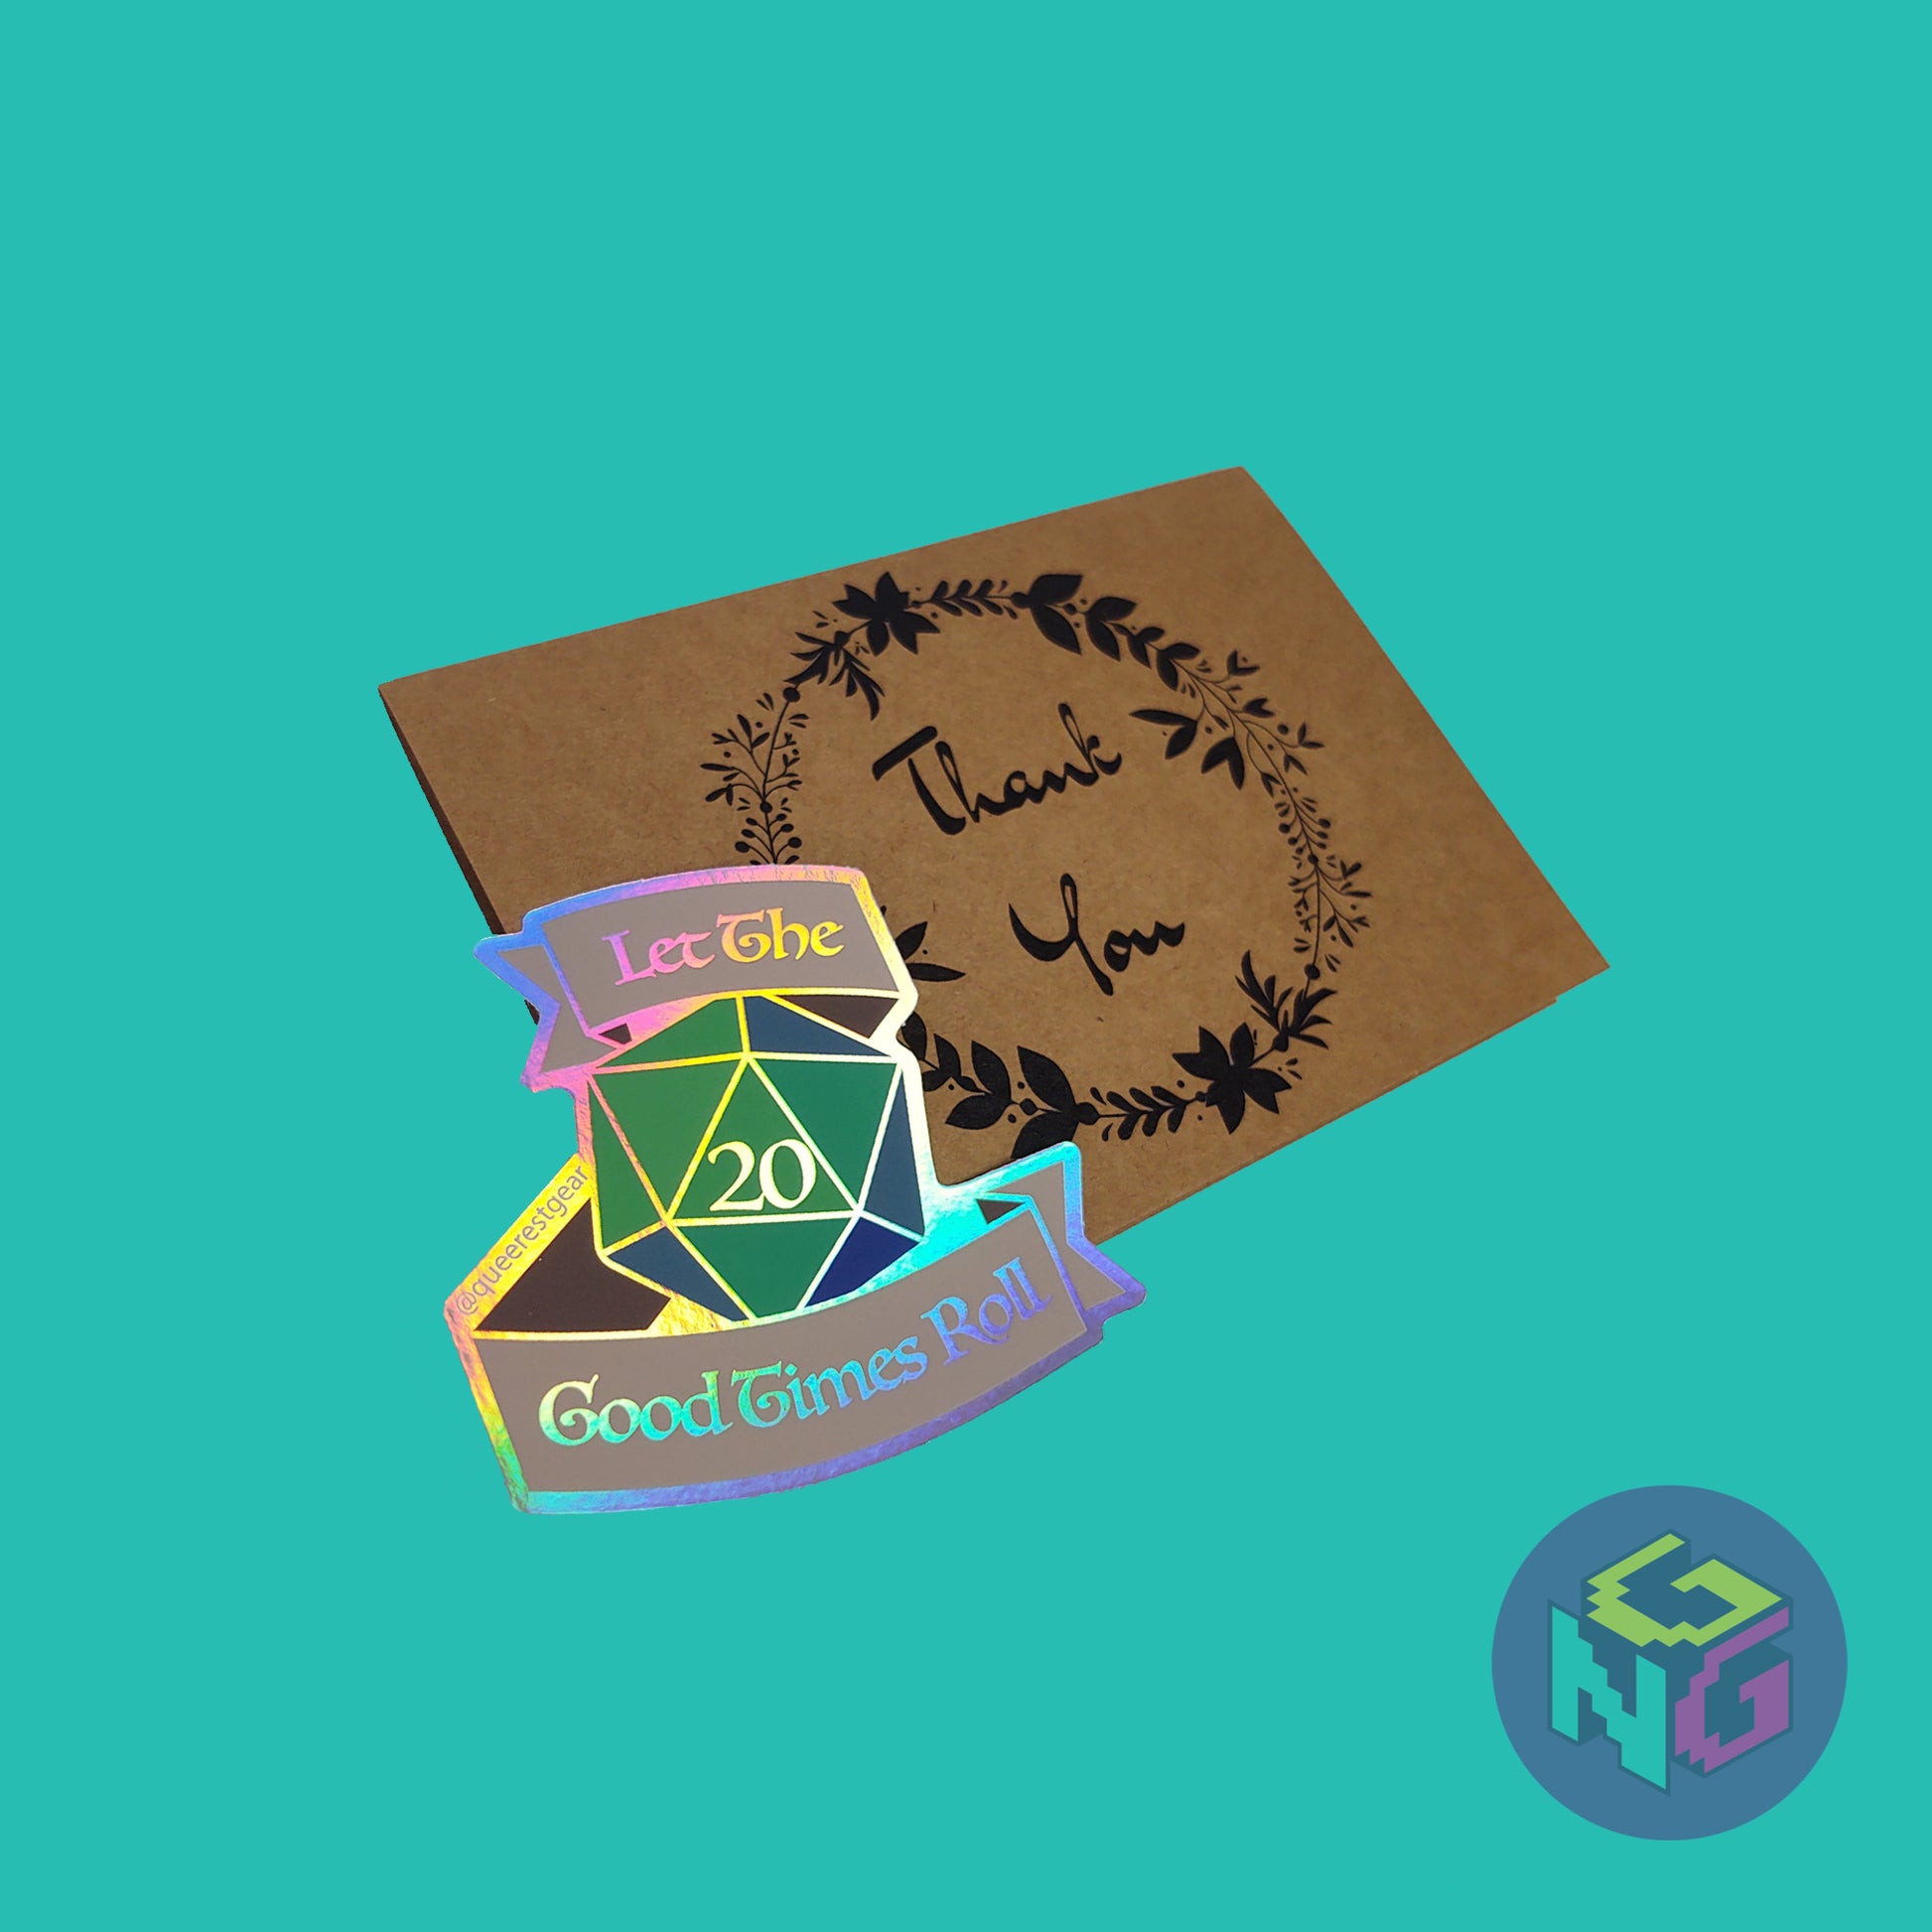 rainbow holographic d20 let the good times roll d20 in front of brown kraft paper thank you card on mint green background